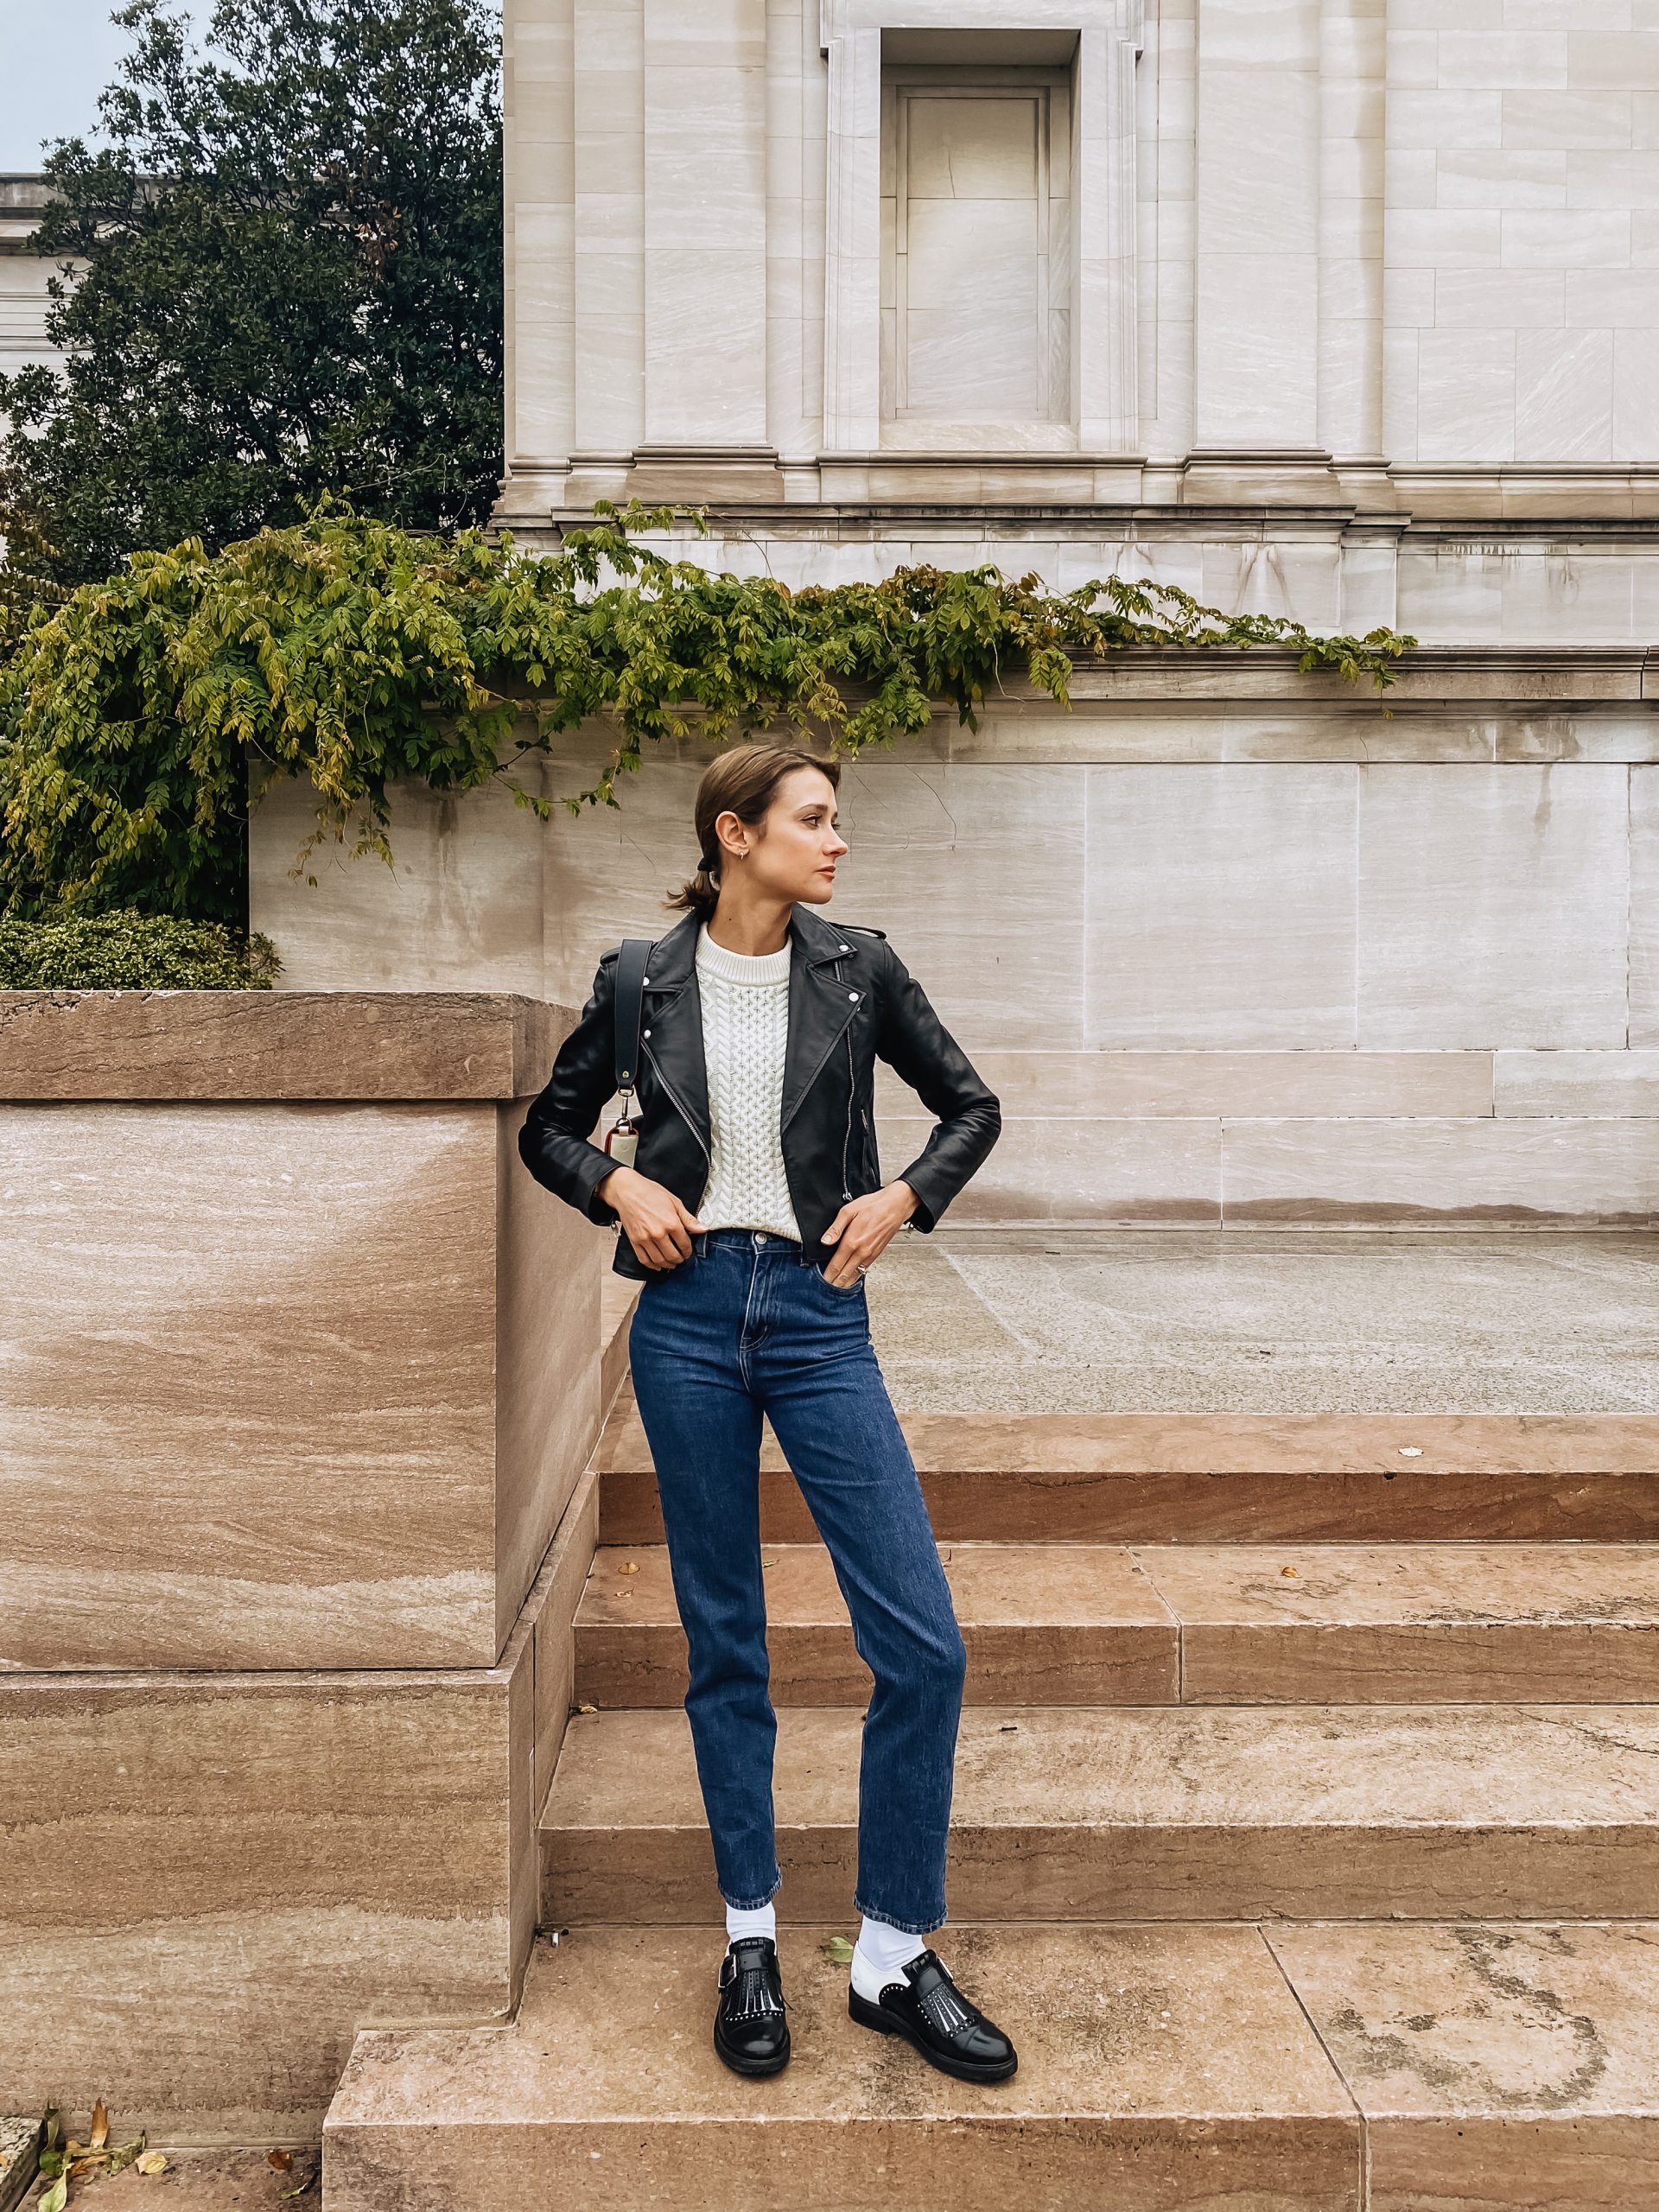 a classic leather jacket from a chic French brand